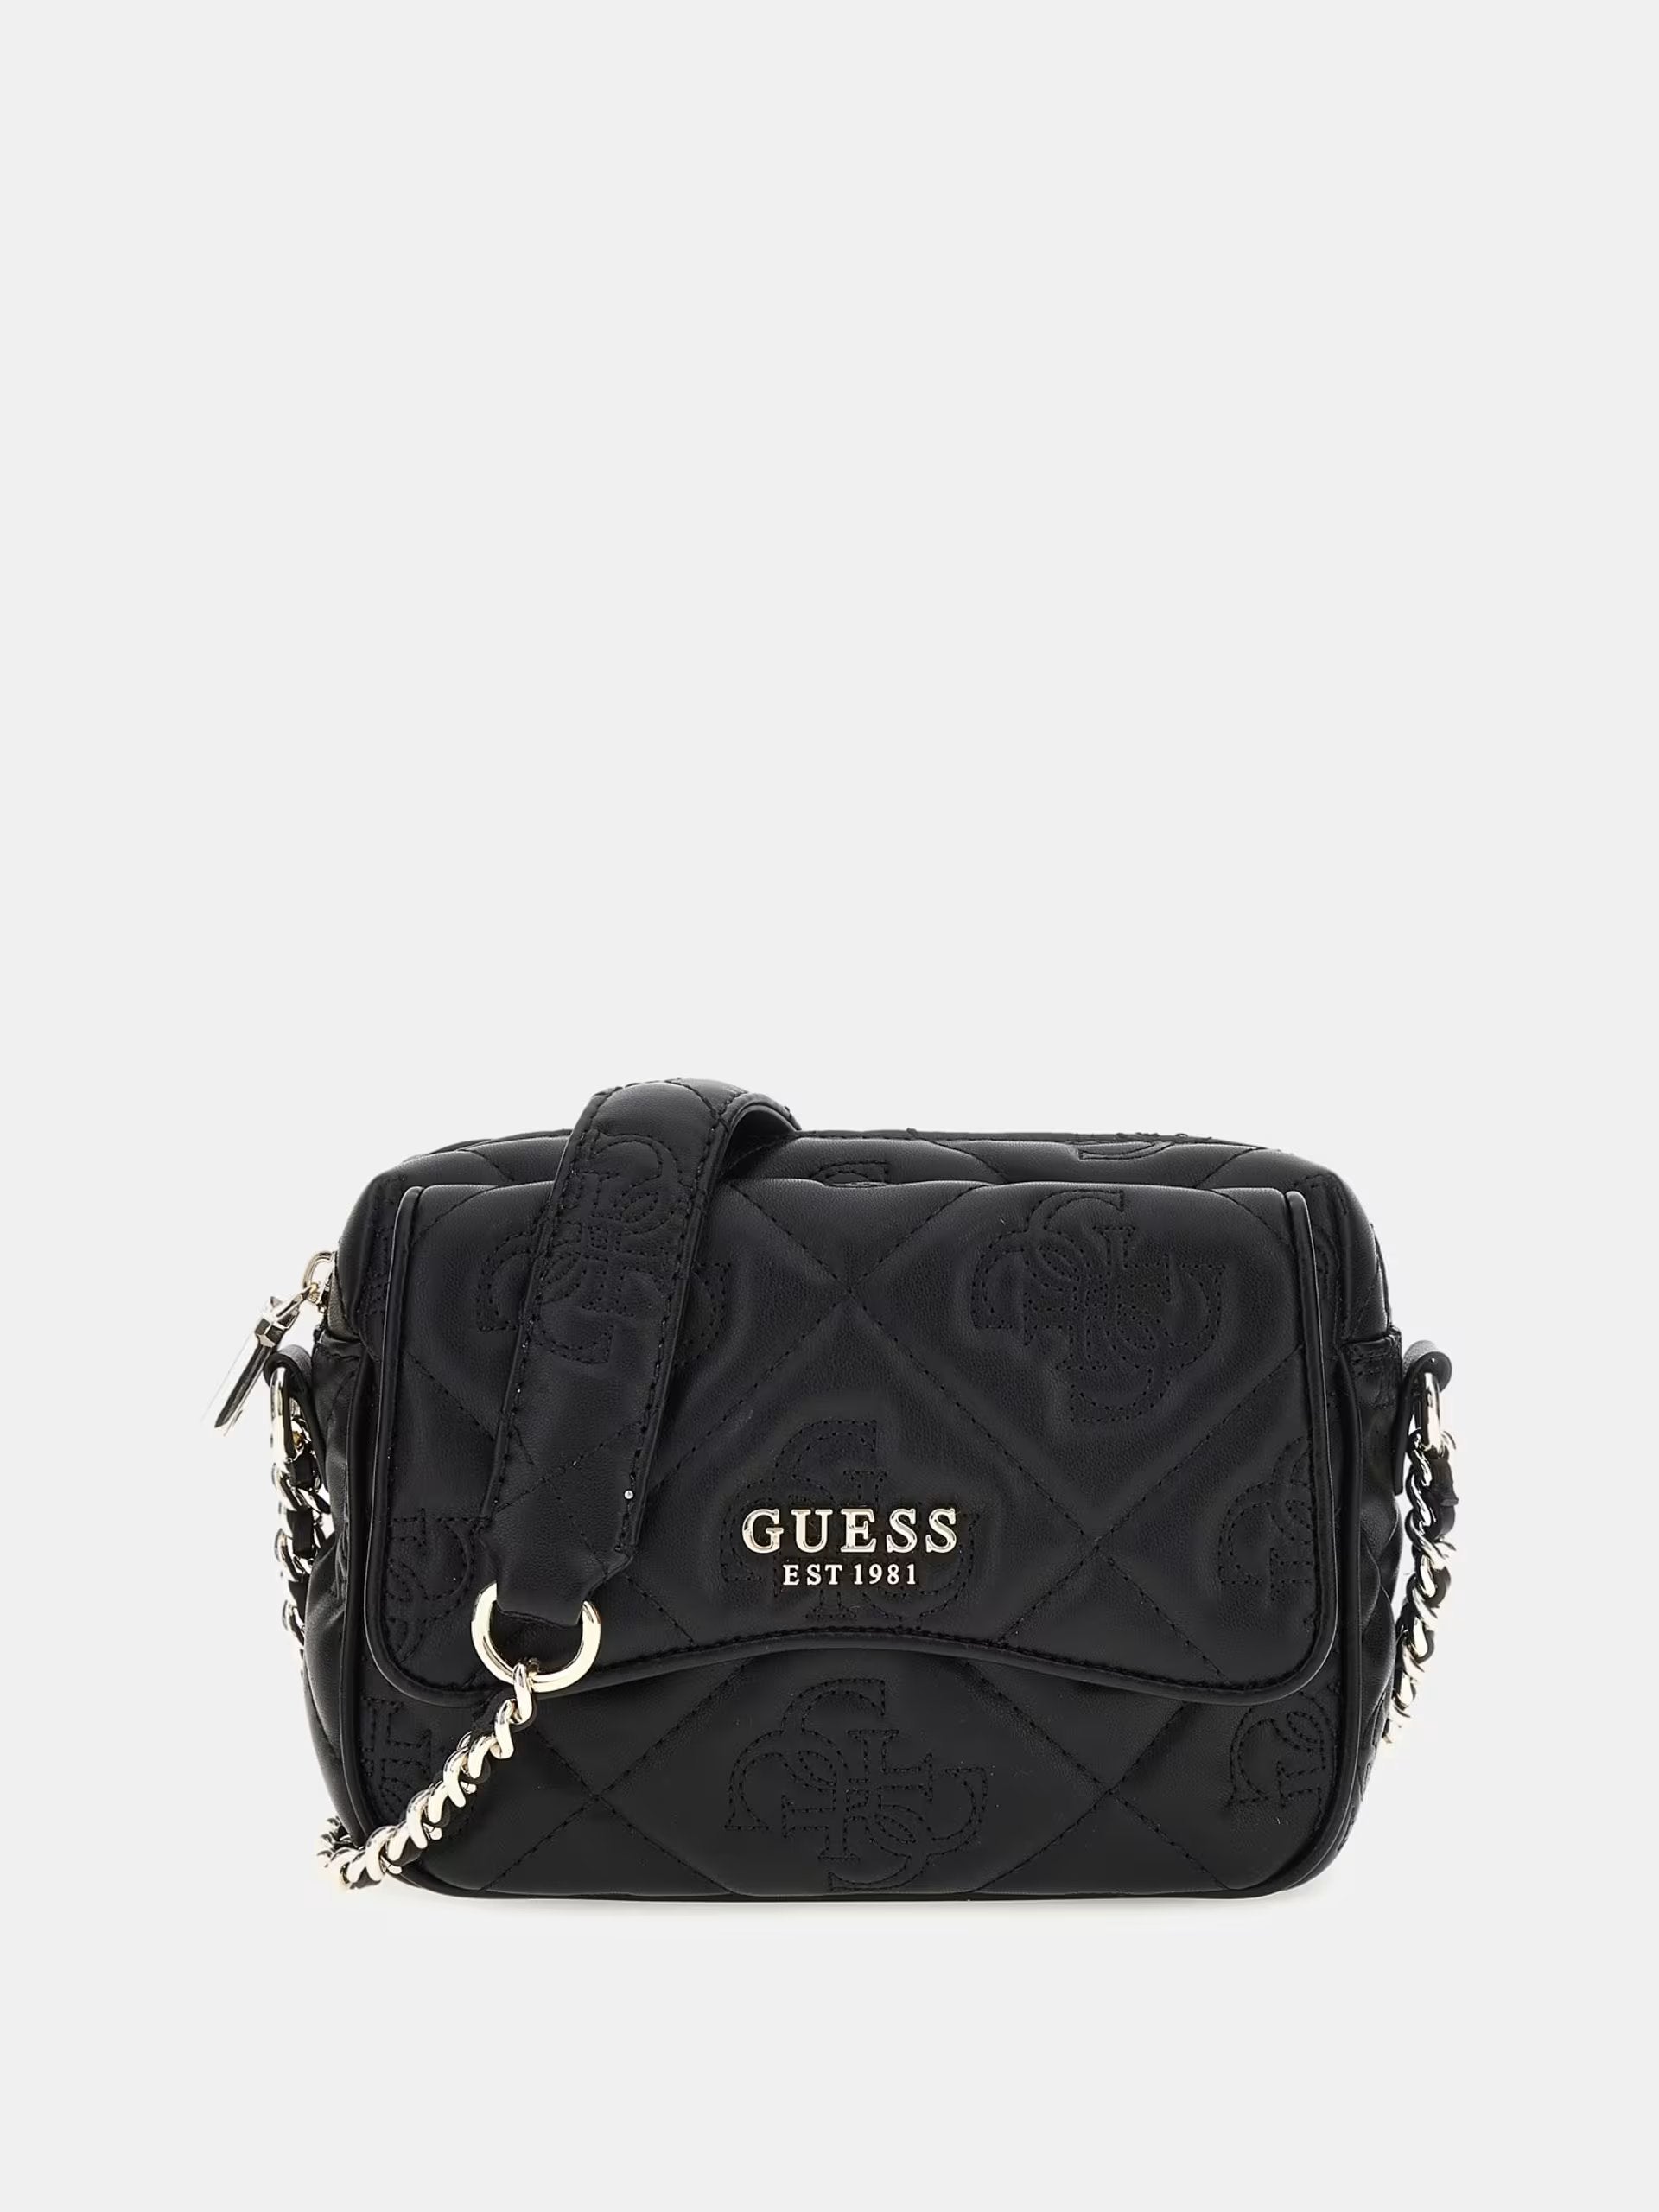 Guess Womens Crossbody Bags Price South Africa | guesssouthafricasale.com